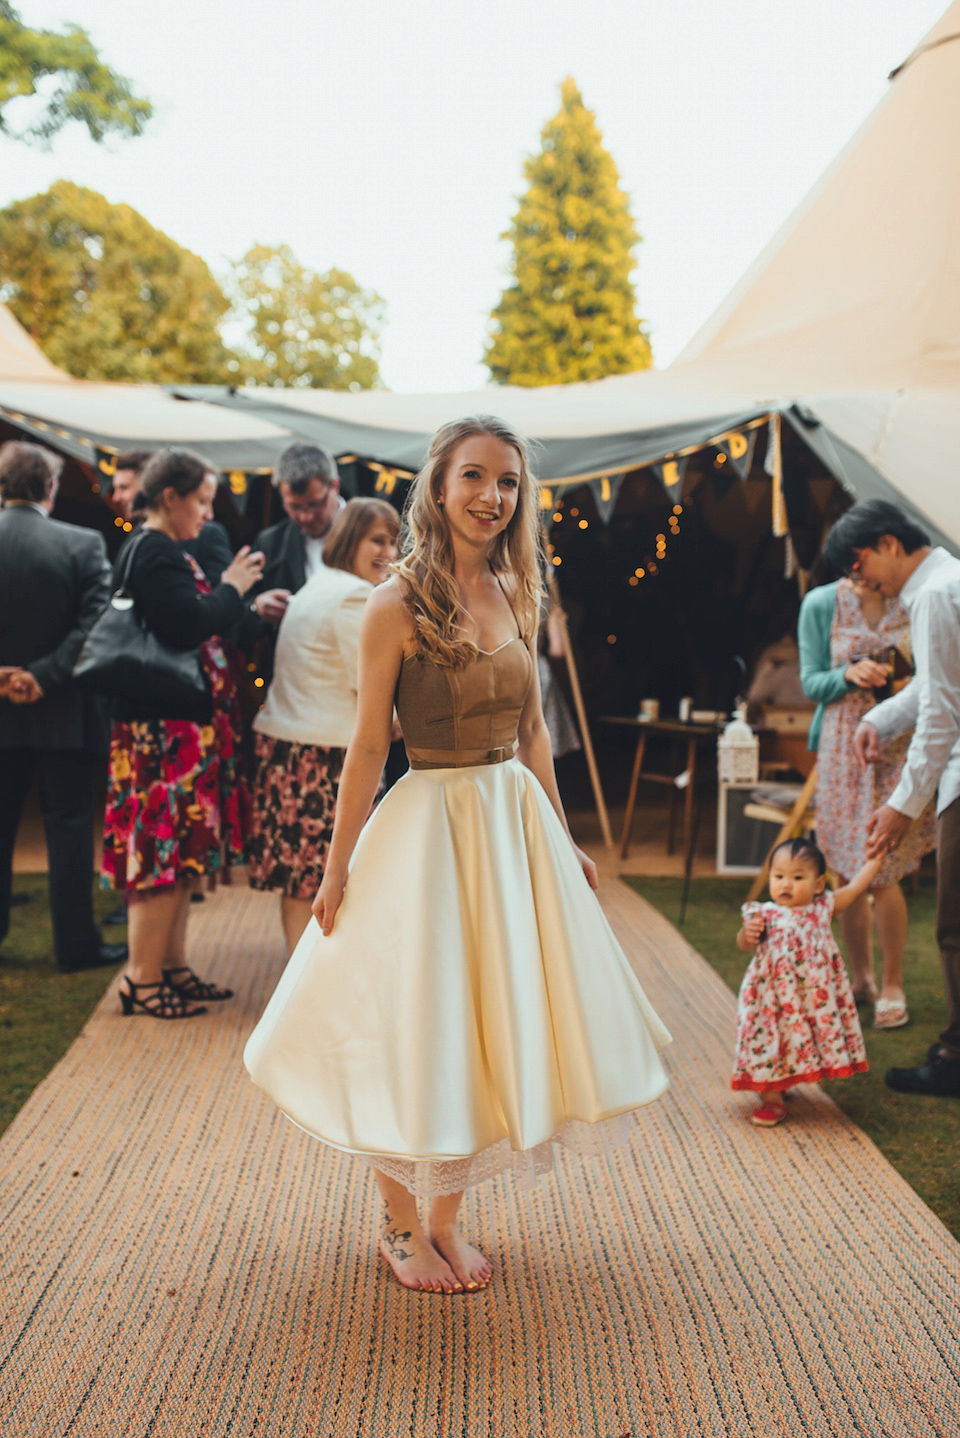 Daisy Bouquets and Tipis for a Colourful Summer Tipi Wedding, photography by Becky Ryan.